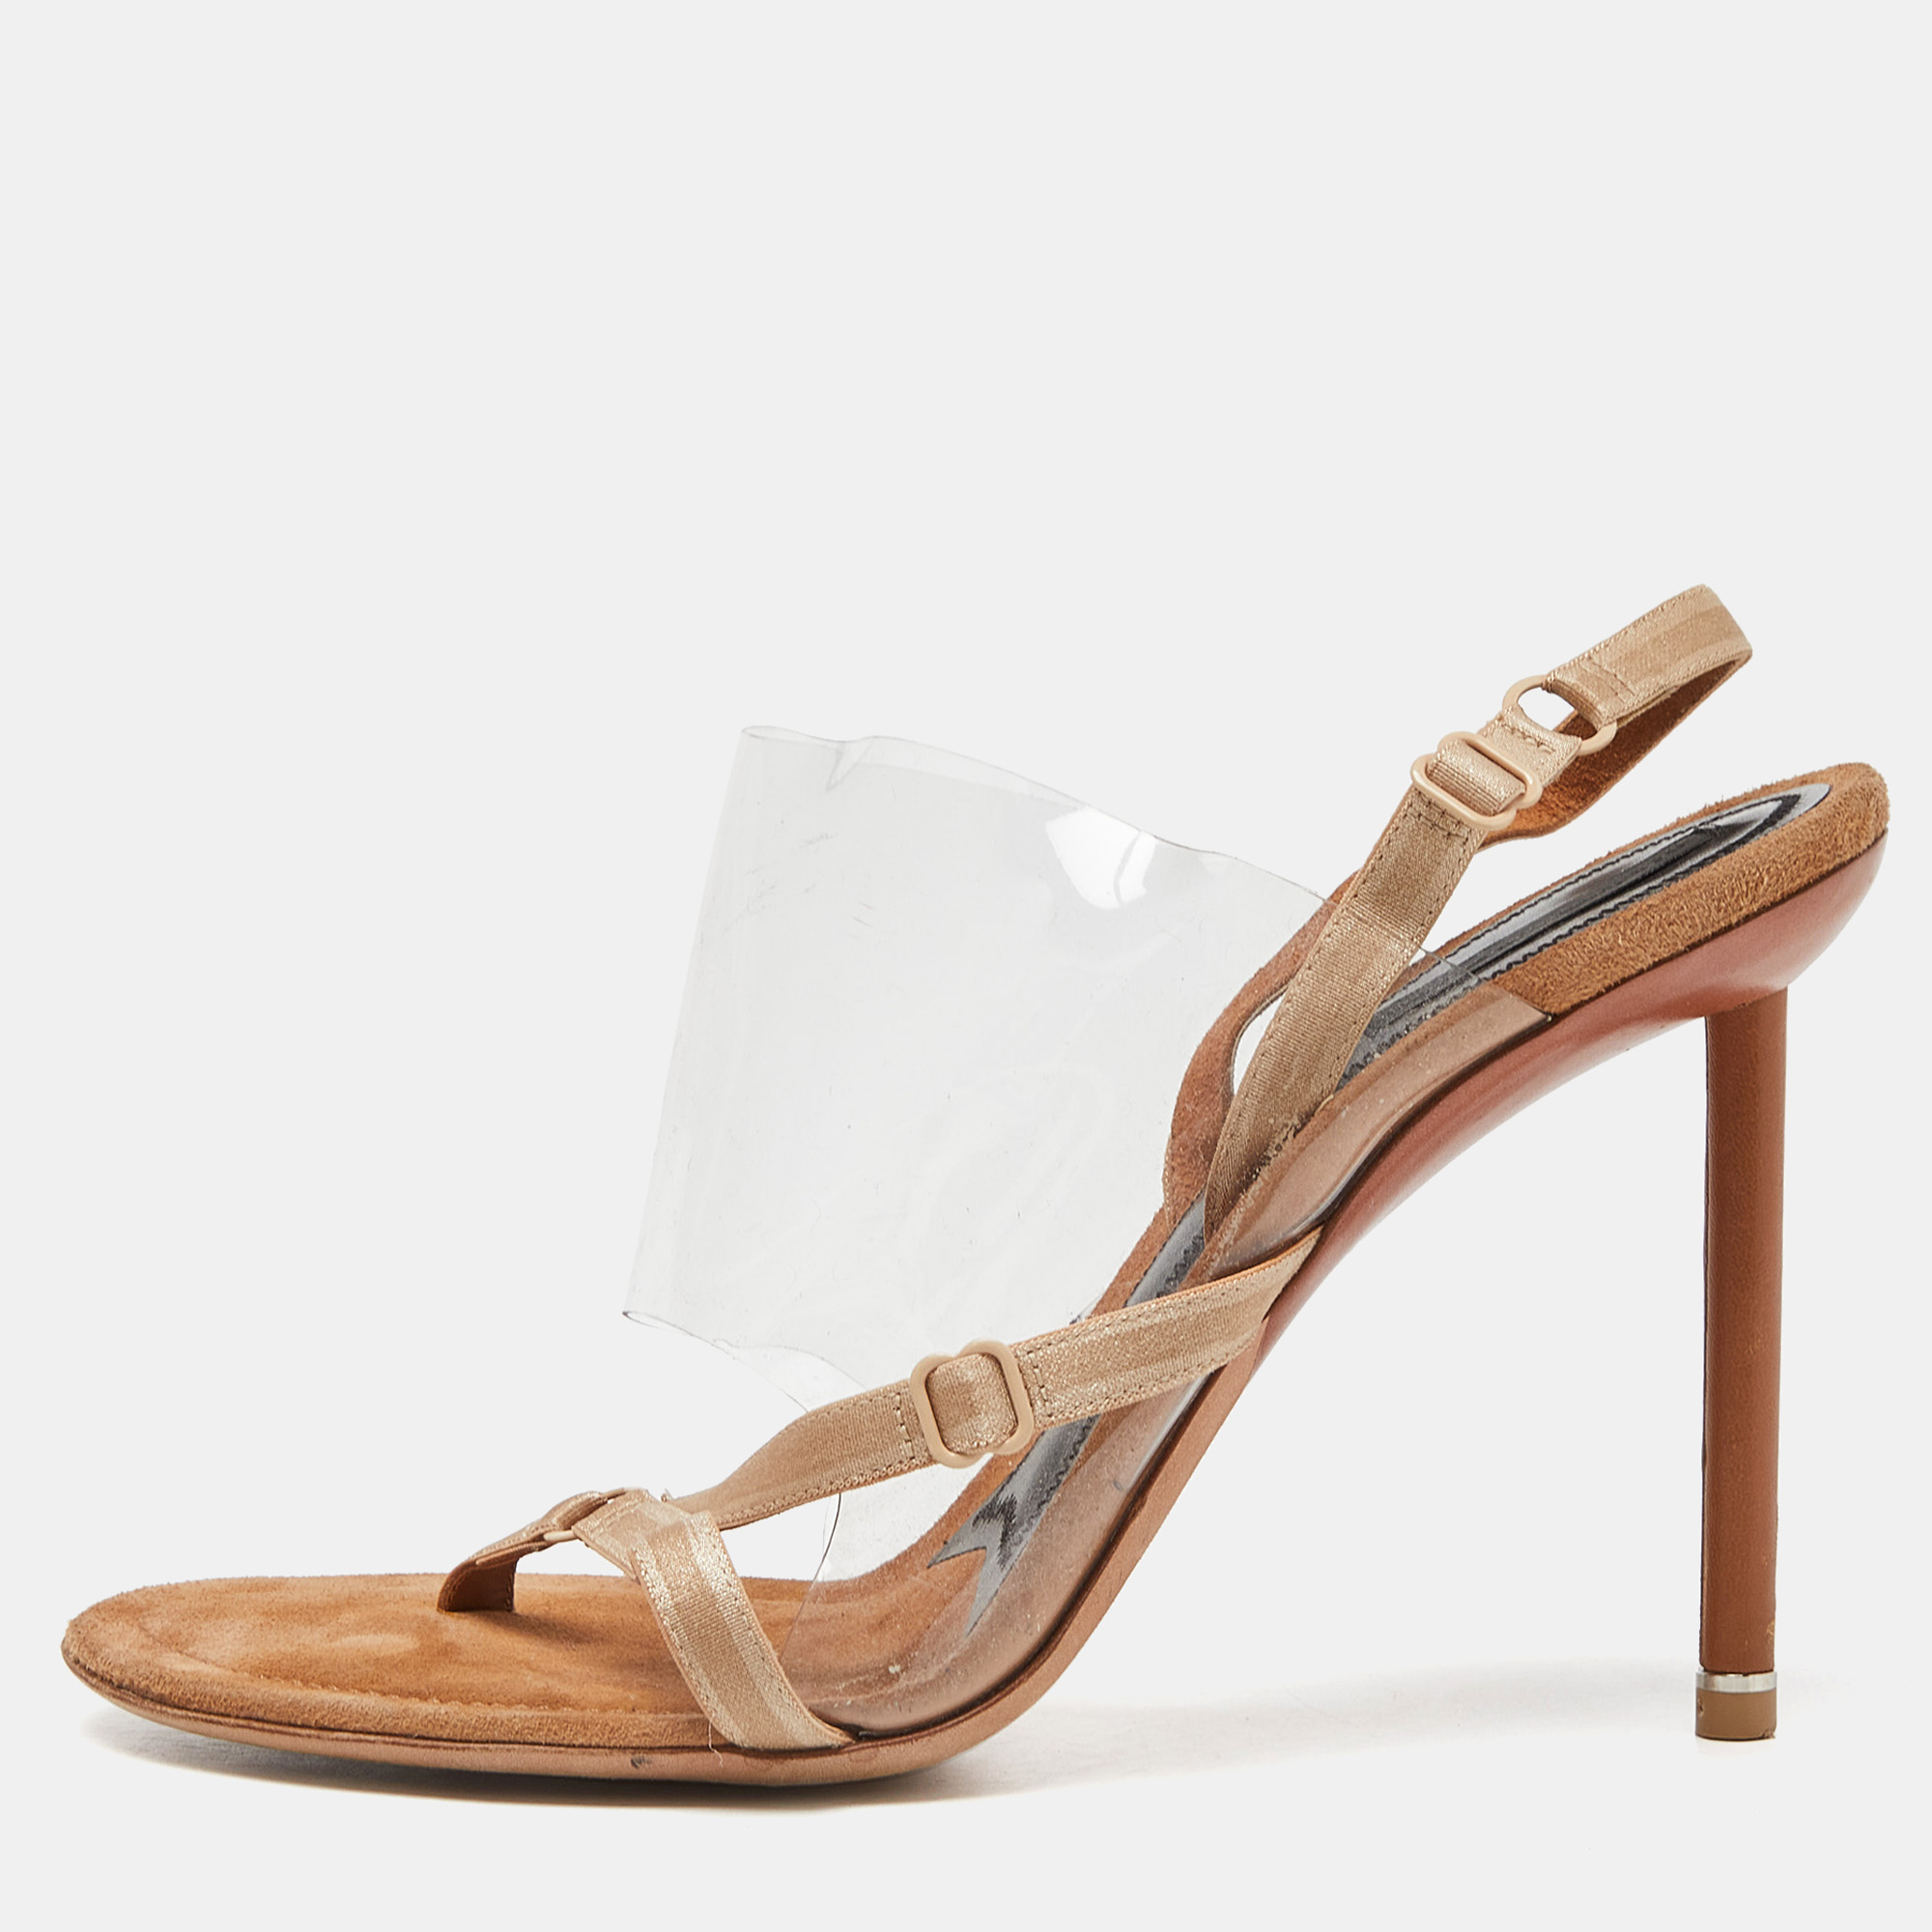 Alexander wang beige/transparent suede and pvc thong slingback sandals size 39